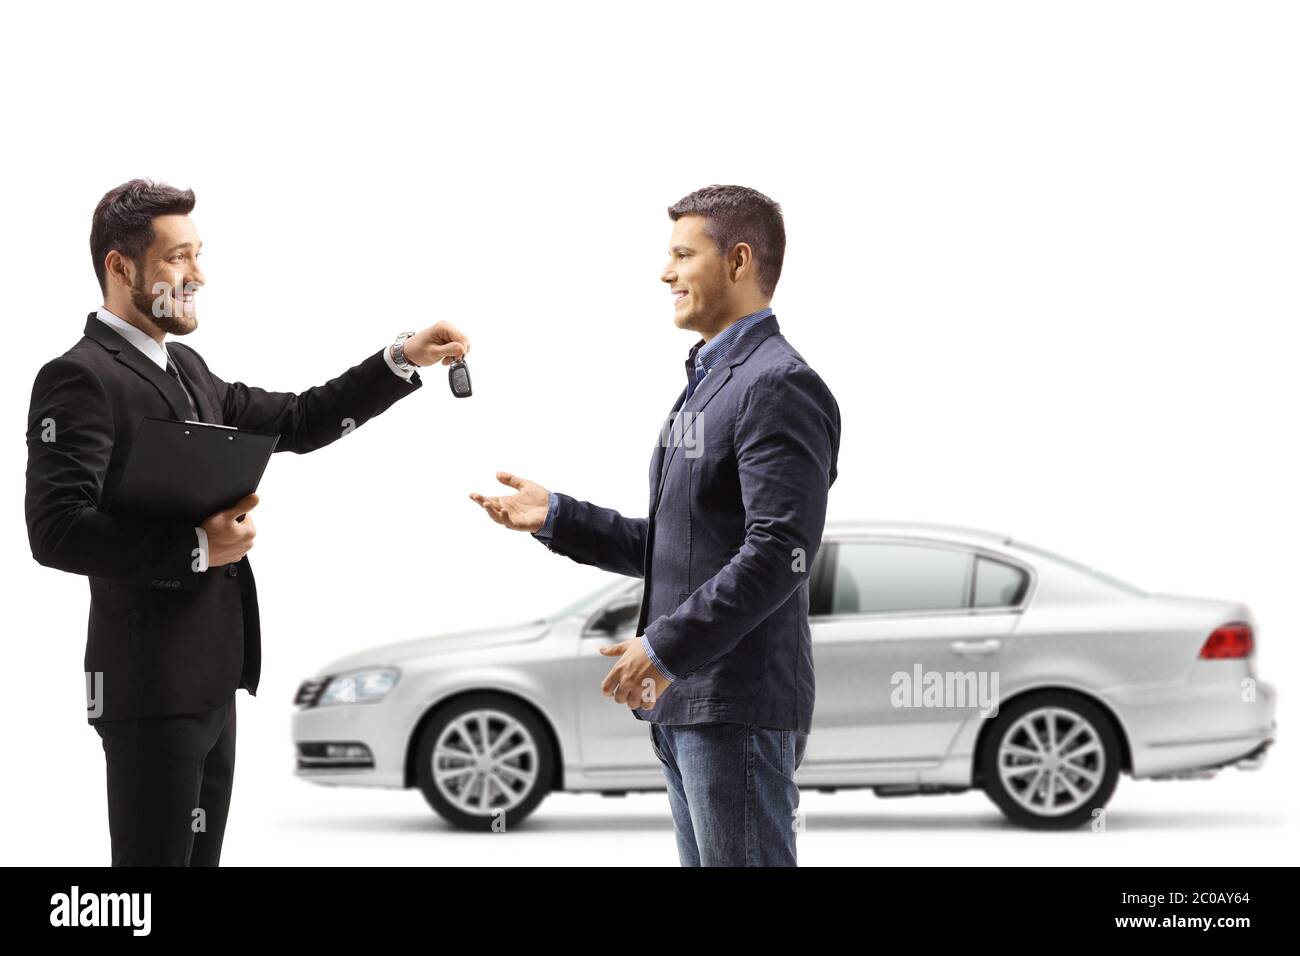 Car salesman giving car keys from a silver new car to a man isolated on white background Stock Photo